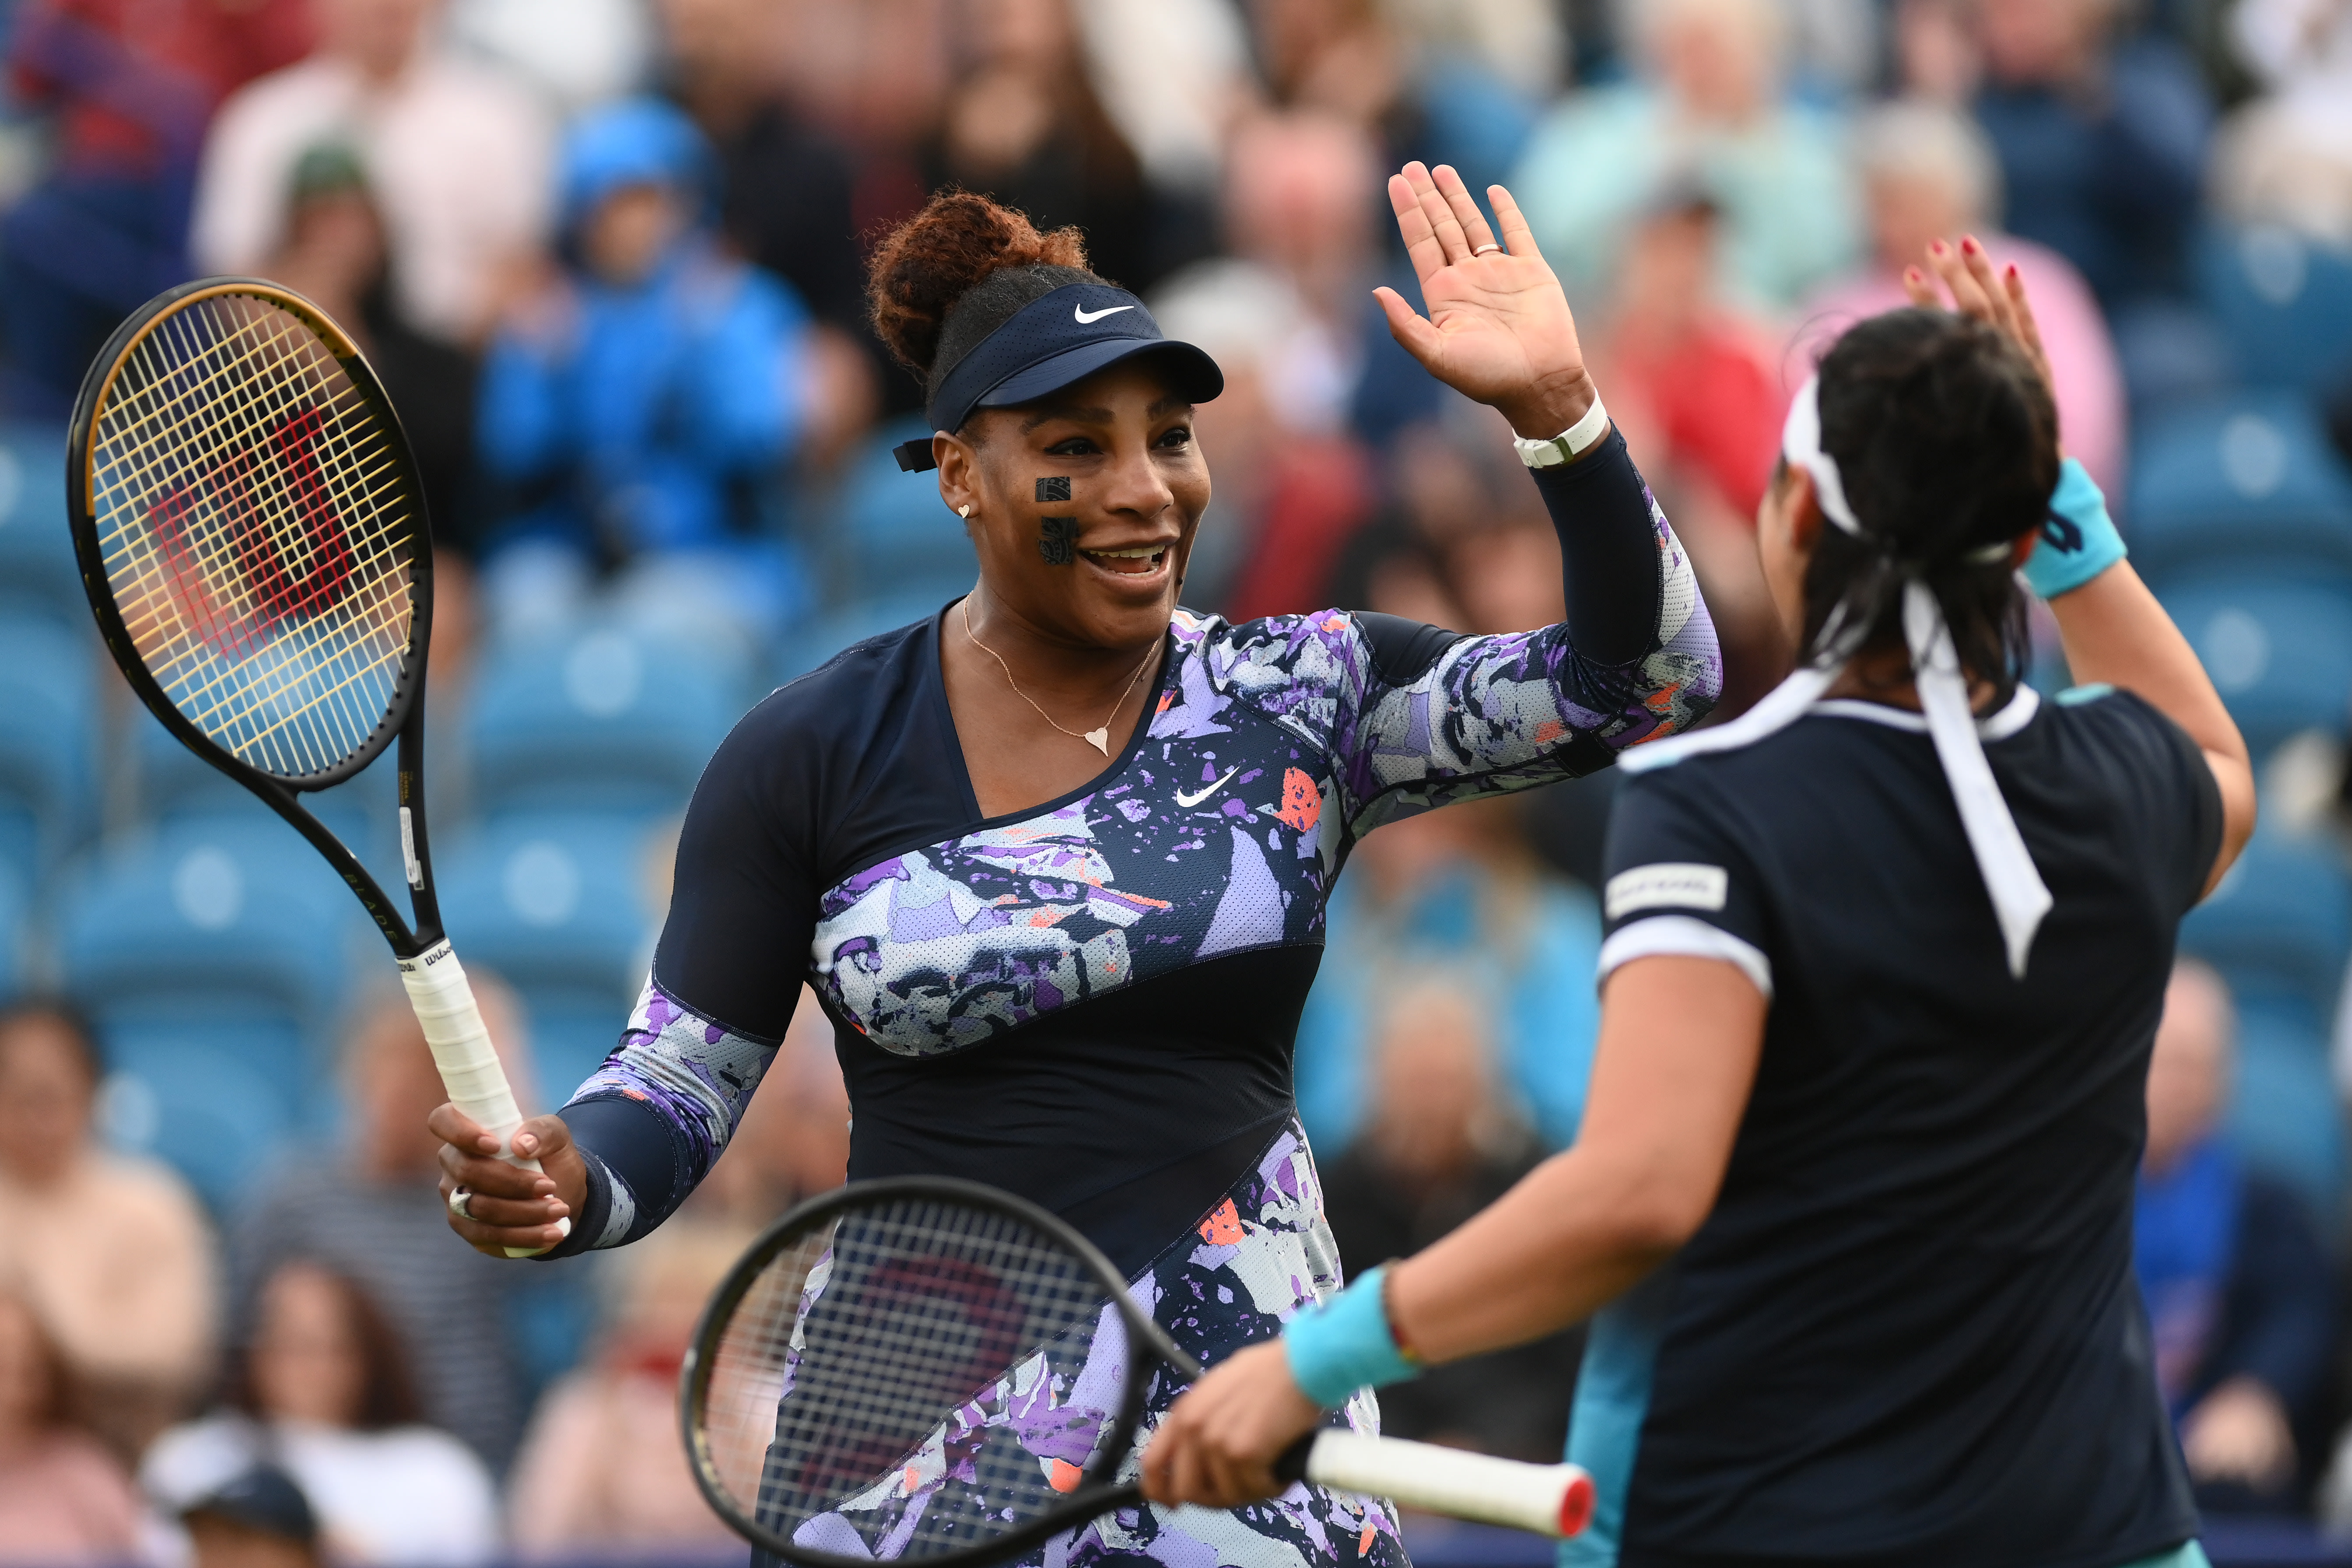 Doubles Take Serena Williams returns to action; Mate Pavic keeps winning